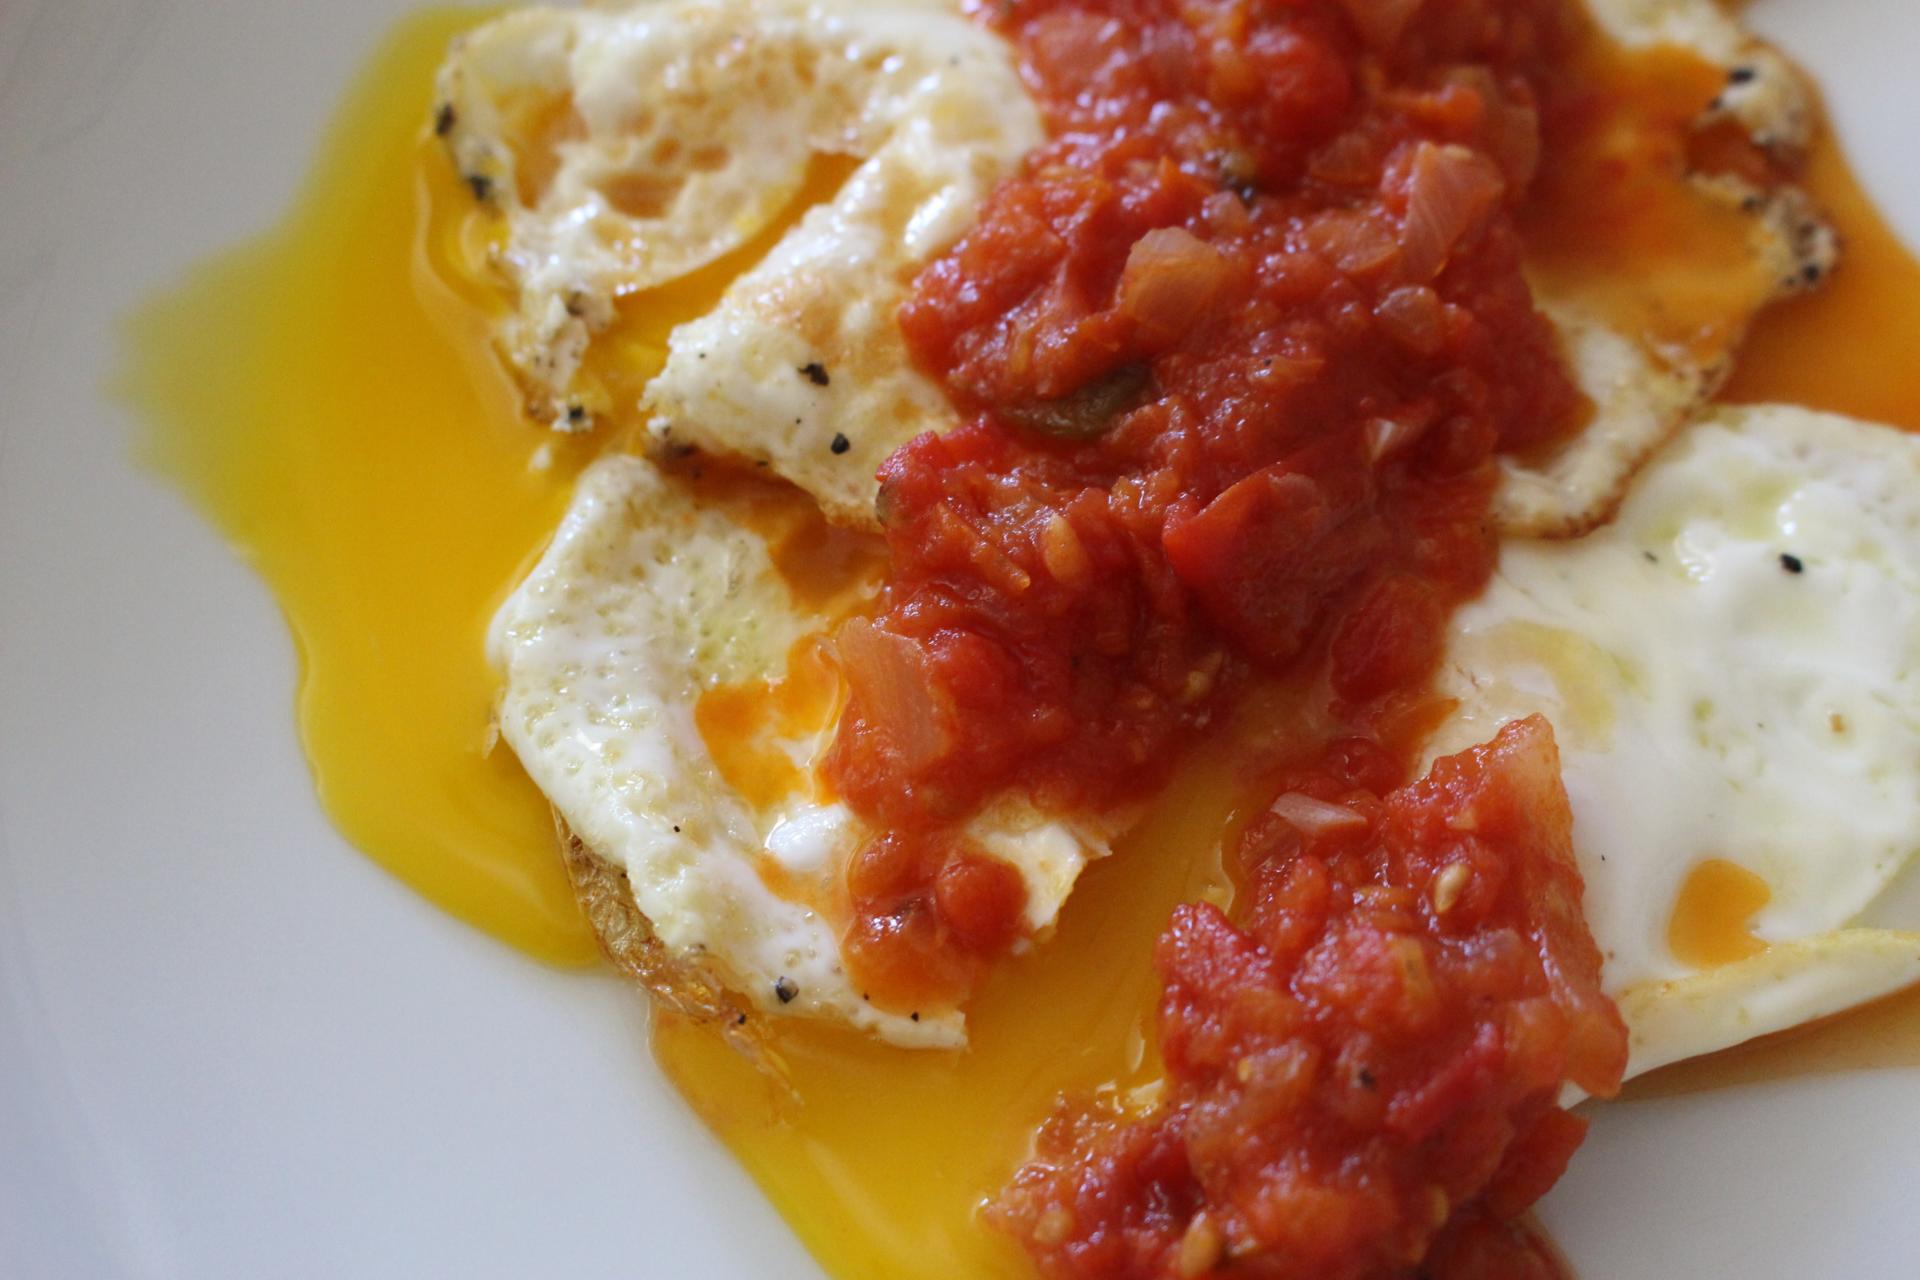 BREAKFAST: Over Easy Eggs with Spicy Tomato Sauce